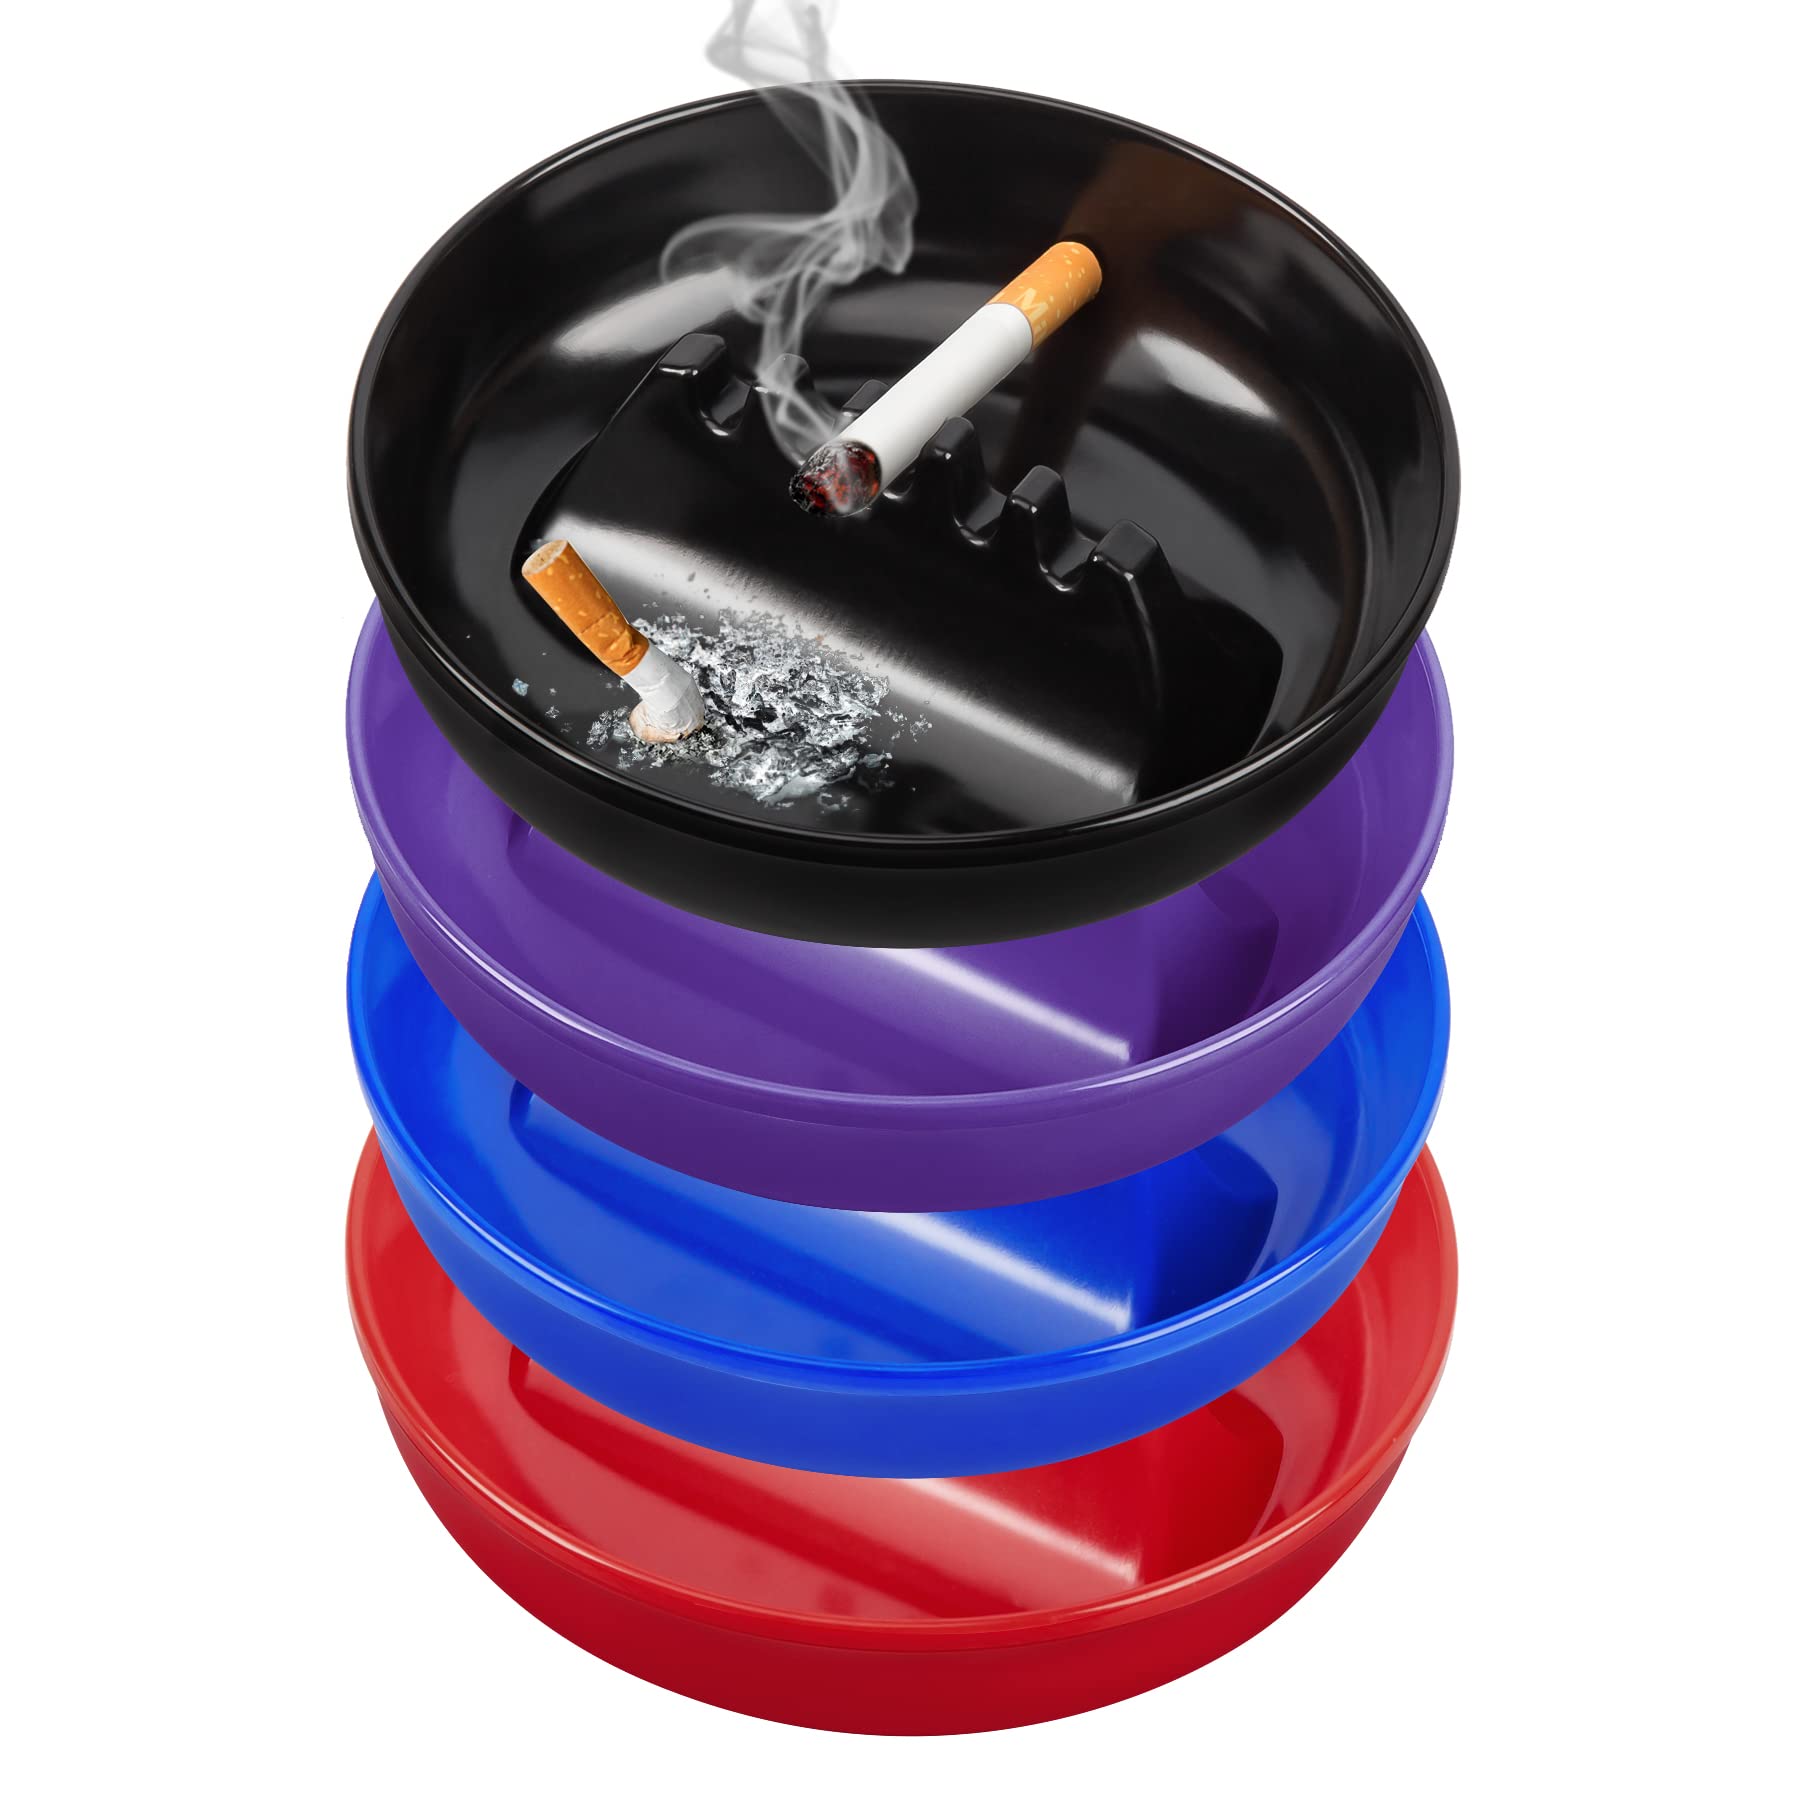 Monoture Ash Tray for Cigarettes,Indoor/Outdoor Ashtray for Patio、Home、Office Decor,Vintage Plastic Ashtrays for Cigarettes With 5 Cigarette Ports,Cool Home Ashtrays Round 4-pack of Mixed Colors